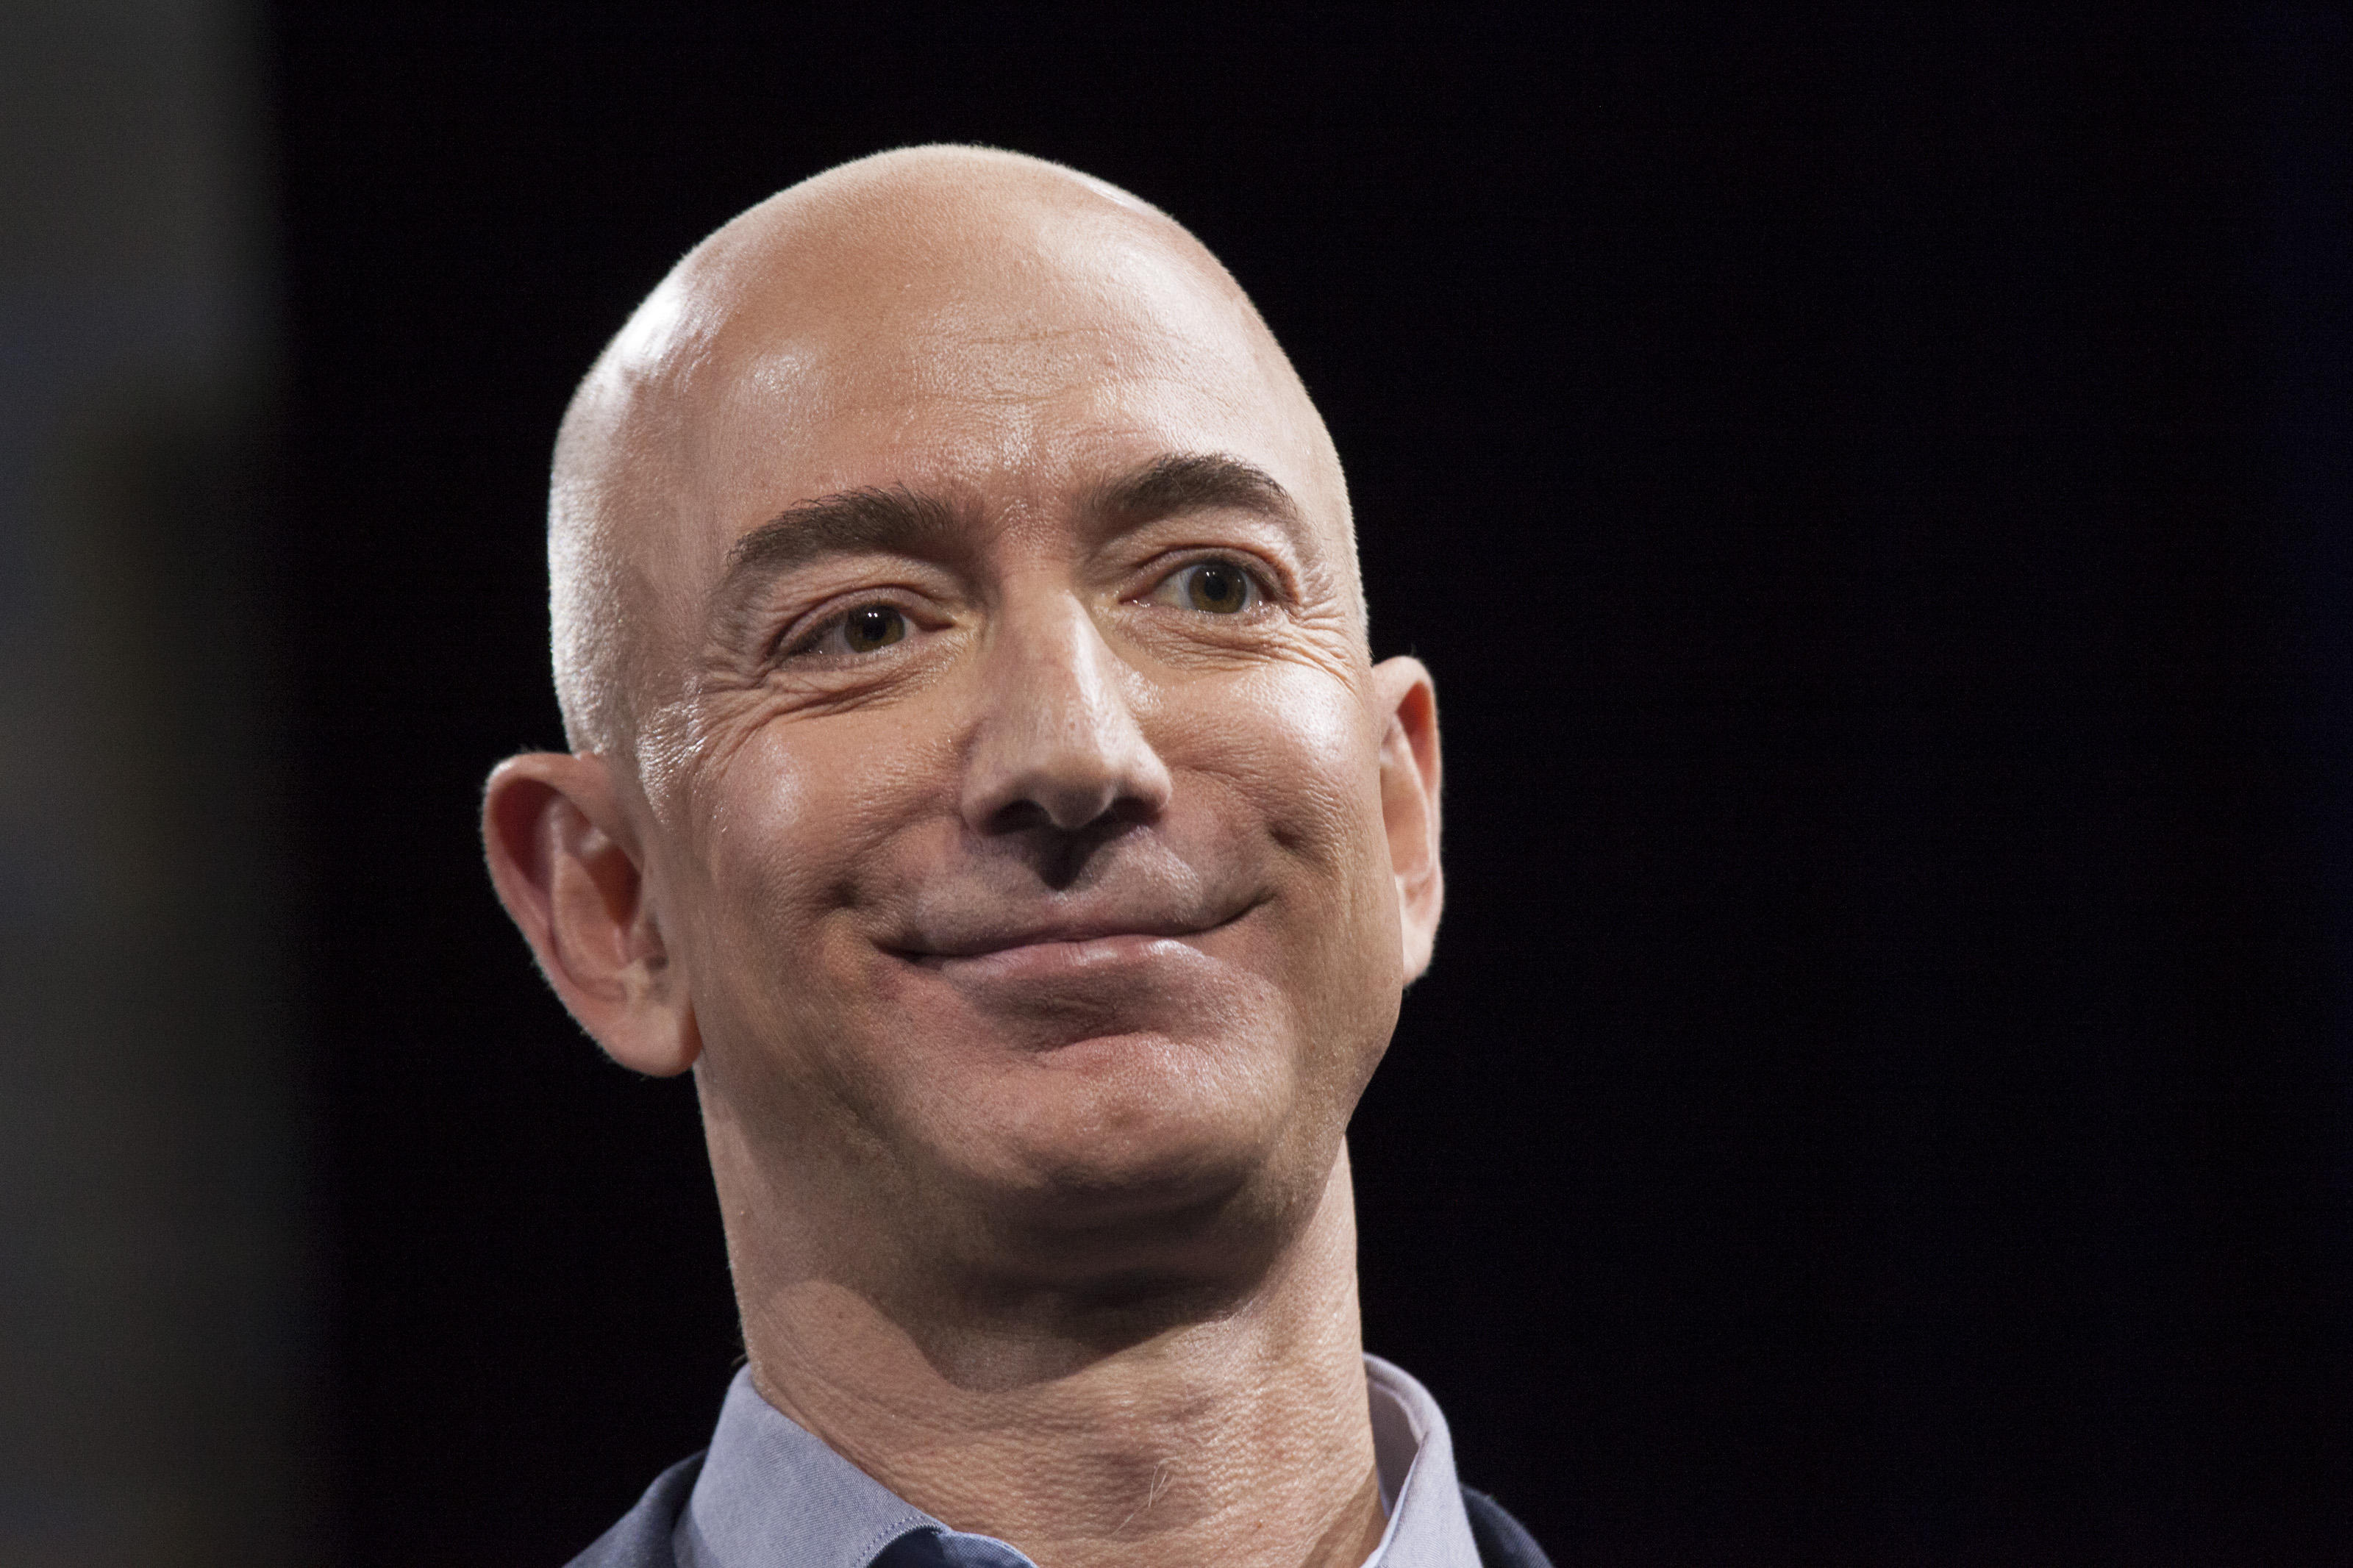 Jeff Bezos, world's richest man, gets $2.8B richer in one day after debut  of  Go, Fortune magazine says - CBS News